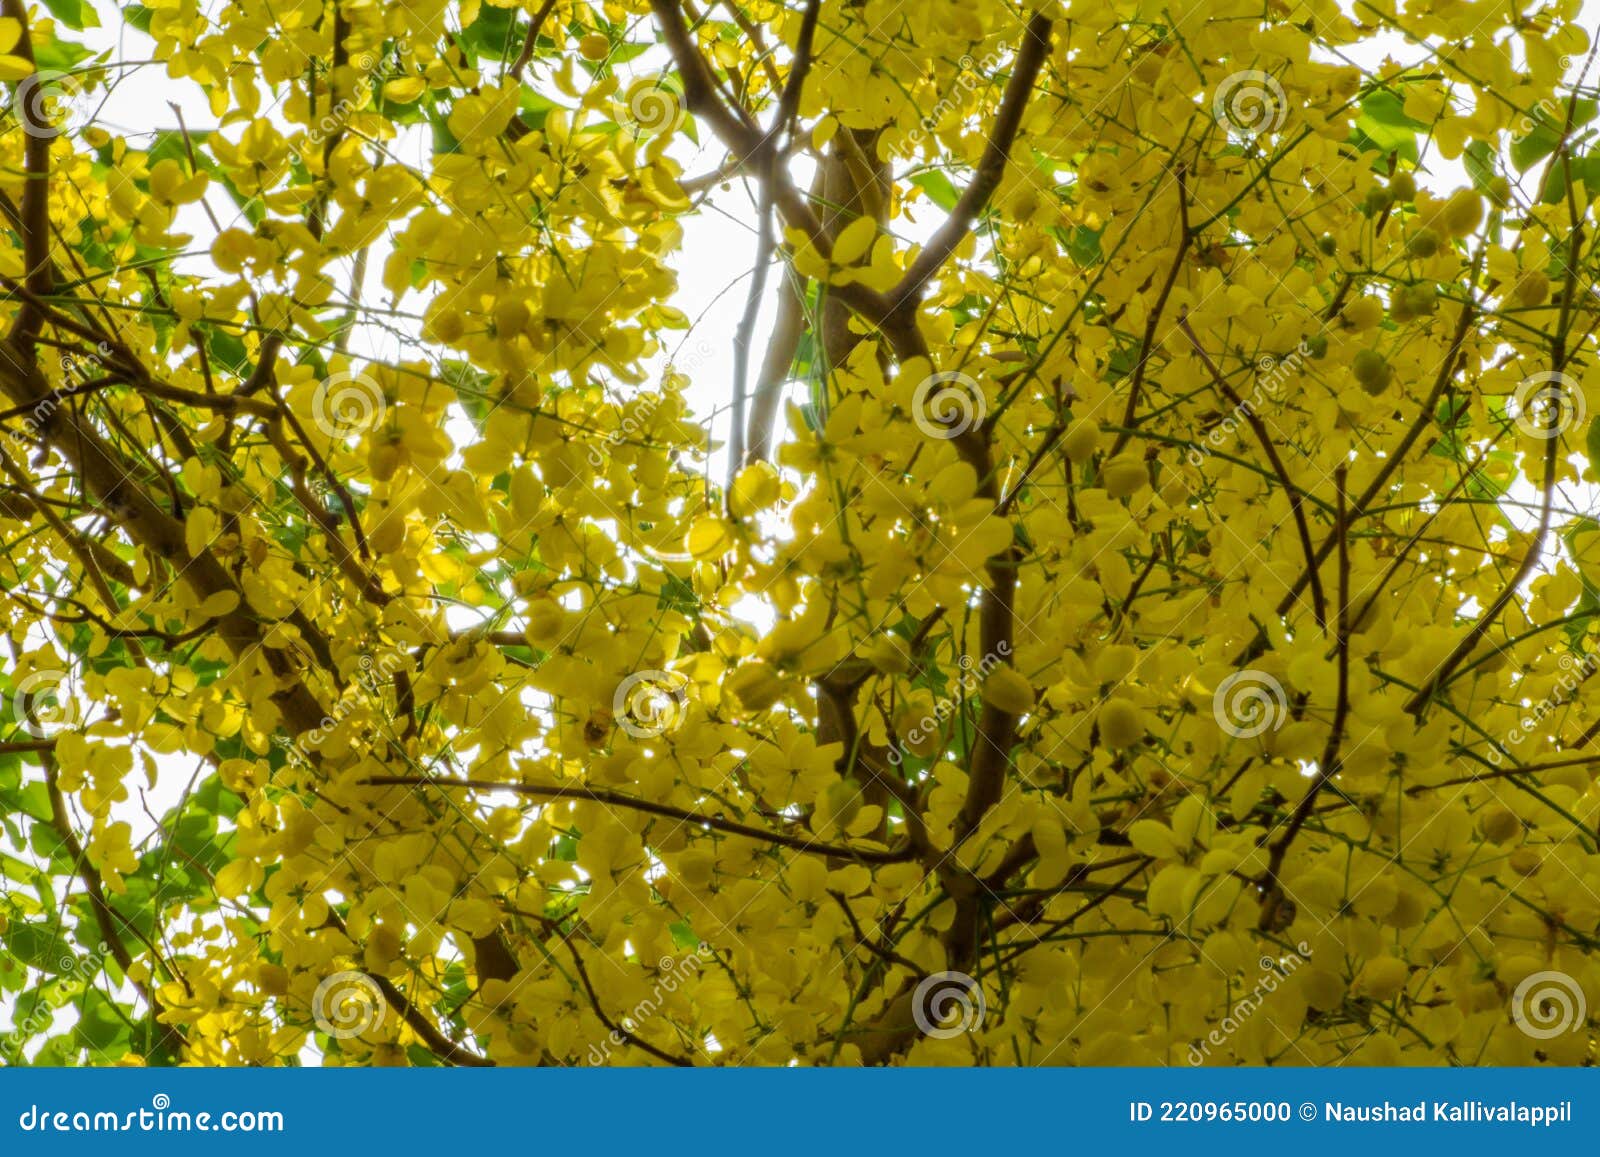 Golden Shower Tree in Bloom Stock Photo - Image of detail, cassia: 220965000